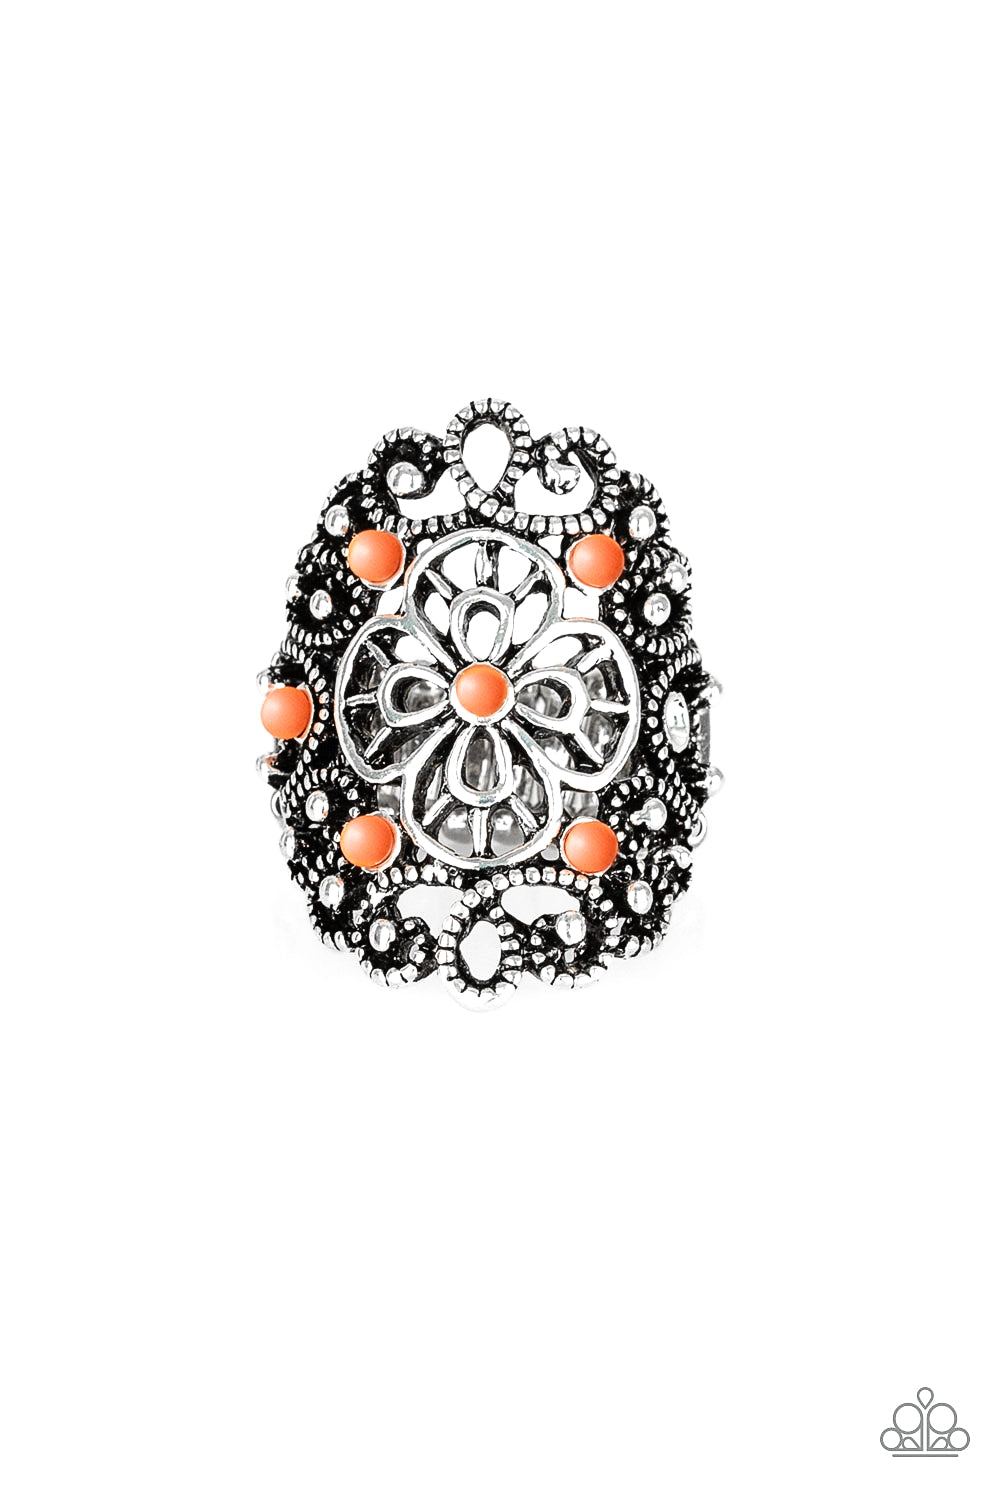 Floral Fancies - Orange and Silver Ring - Paparazzi Accessories - Dainty Living Coral beads are sprinkled across a shimmery frame swirling with silver filigree, creating a whimsical floral frame atop the finger. Features a stretchy band for a flexible fit. Sold as one individual stylish fashion ring.